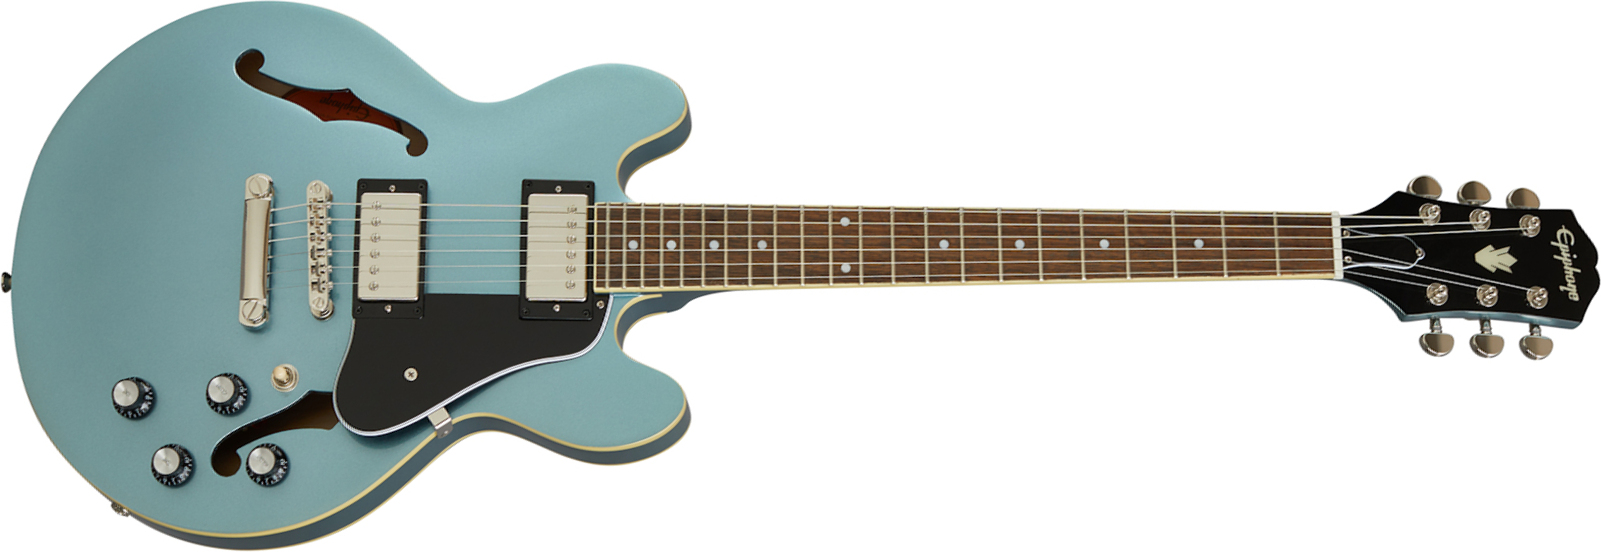 Epiphone Es-339 Inspired By Gibson 2020 2h Ht Rw - Pelham Blue - Semi-Hollow E-Gitarre - Main picture